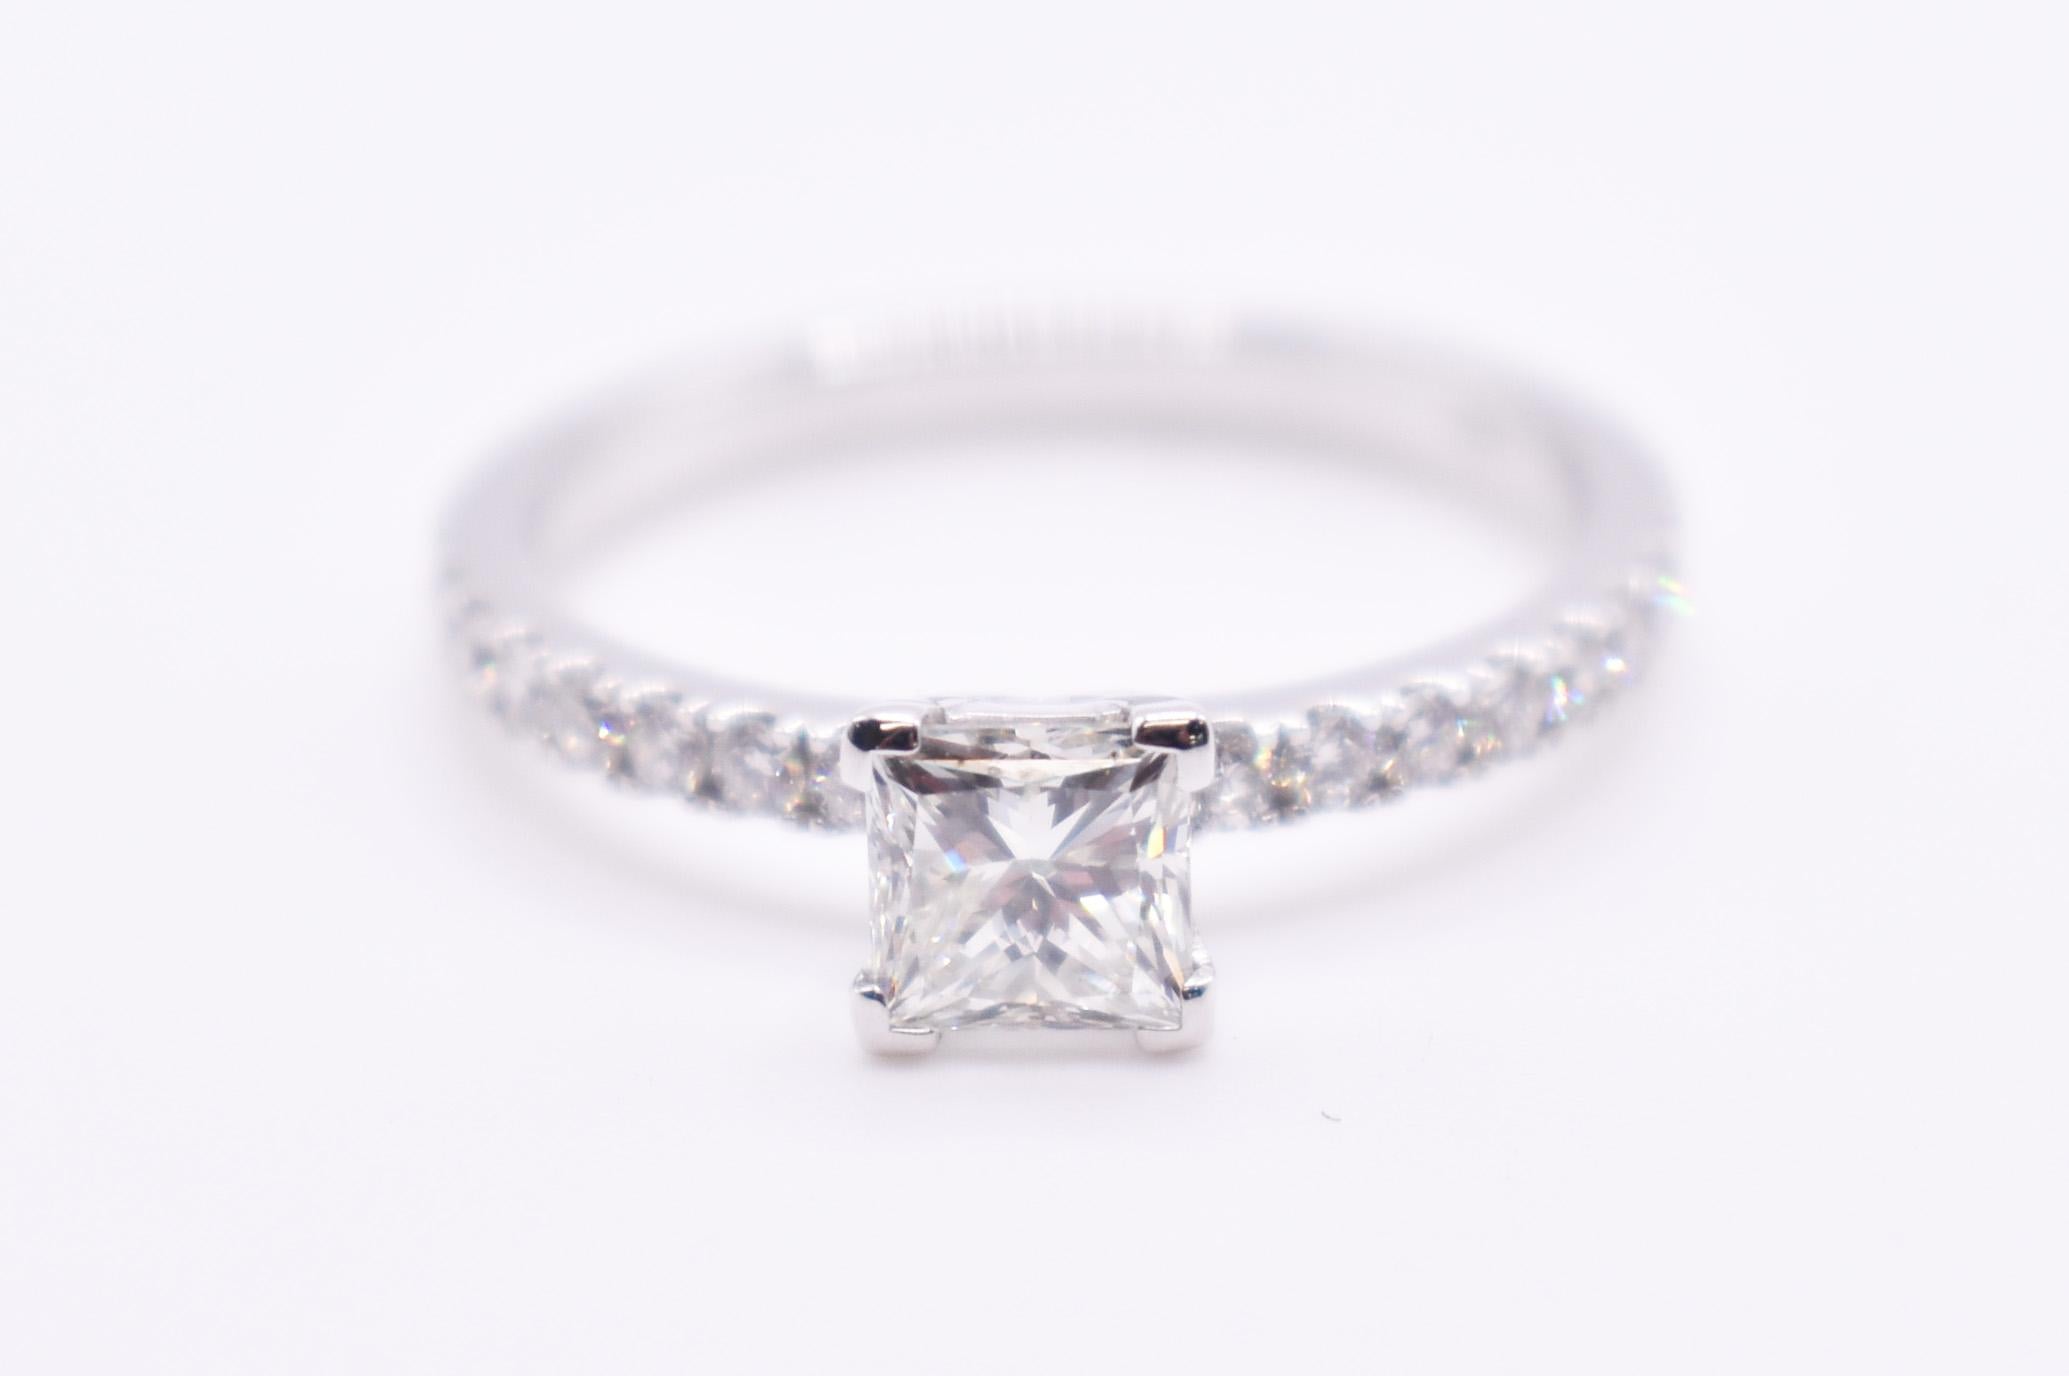 On offer for sale is a beautiful 18K white gold 0.74ct diamond engagement ring, having a princess cut diamond centre with pave sides. 

Metal: 18K White Gold
Total Carat Weight: 1.02
Colour: H
Clarity: VS2
Size: US= 7 UK=N